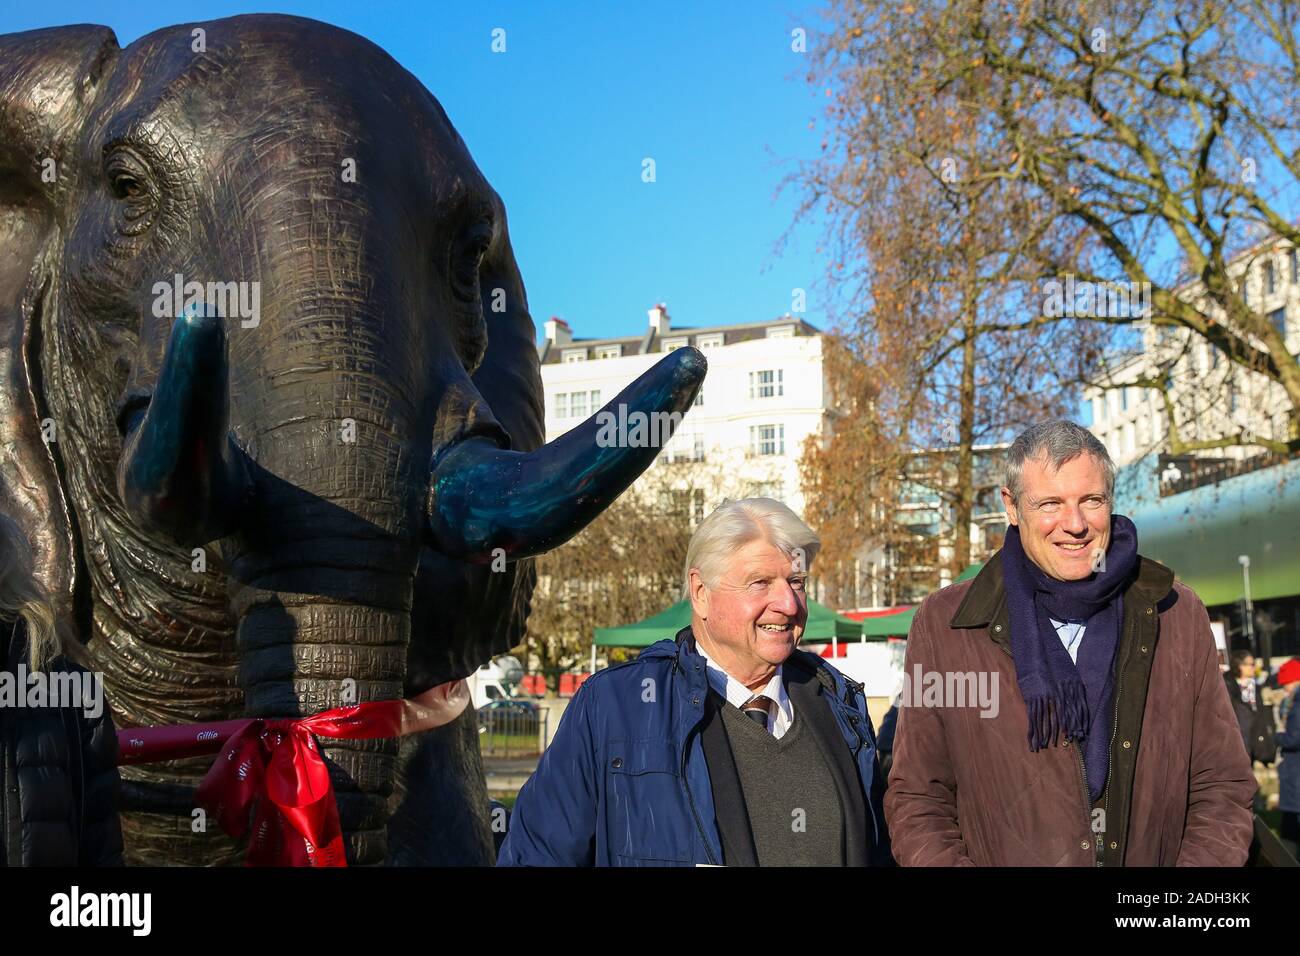 Marble Arch. London, UK 4 Dec 2019 - Parliamentary Conservative candidate for Richmond Park and North Kingston and former Tory candidate for Mayor of London Zac Goldsmith (L) and author and father of the Prime Minister Boris Johnson, Stanley Johnson (R) stand in front of a bronze elephant at Marble Arch. The sculpture is the largest such depictionÊof an elephant herd in the world and is intended to draw attention to the plight of this species that could be extinct on current trends, by 2040. Credit: Dinendra Haria/Alamy Live News Stock Photo